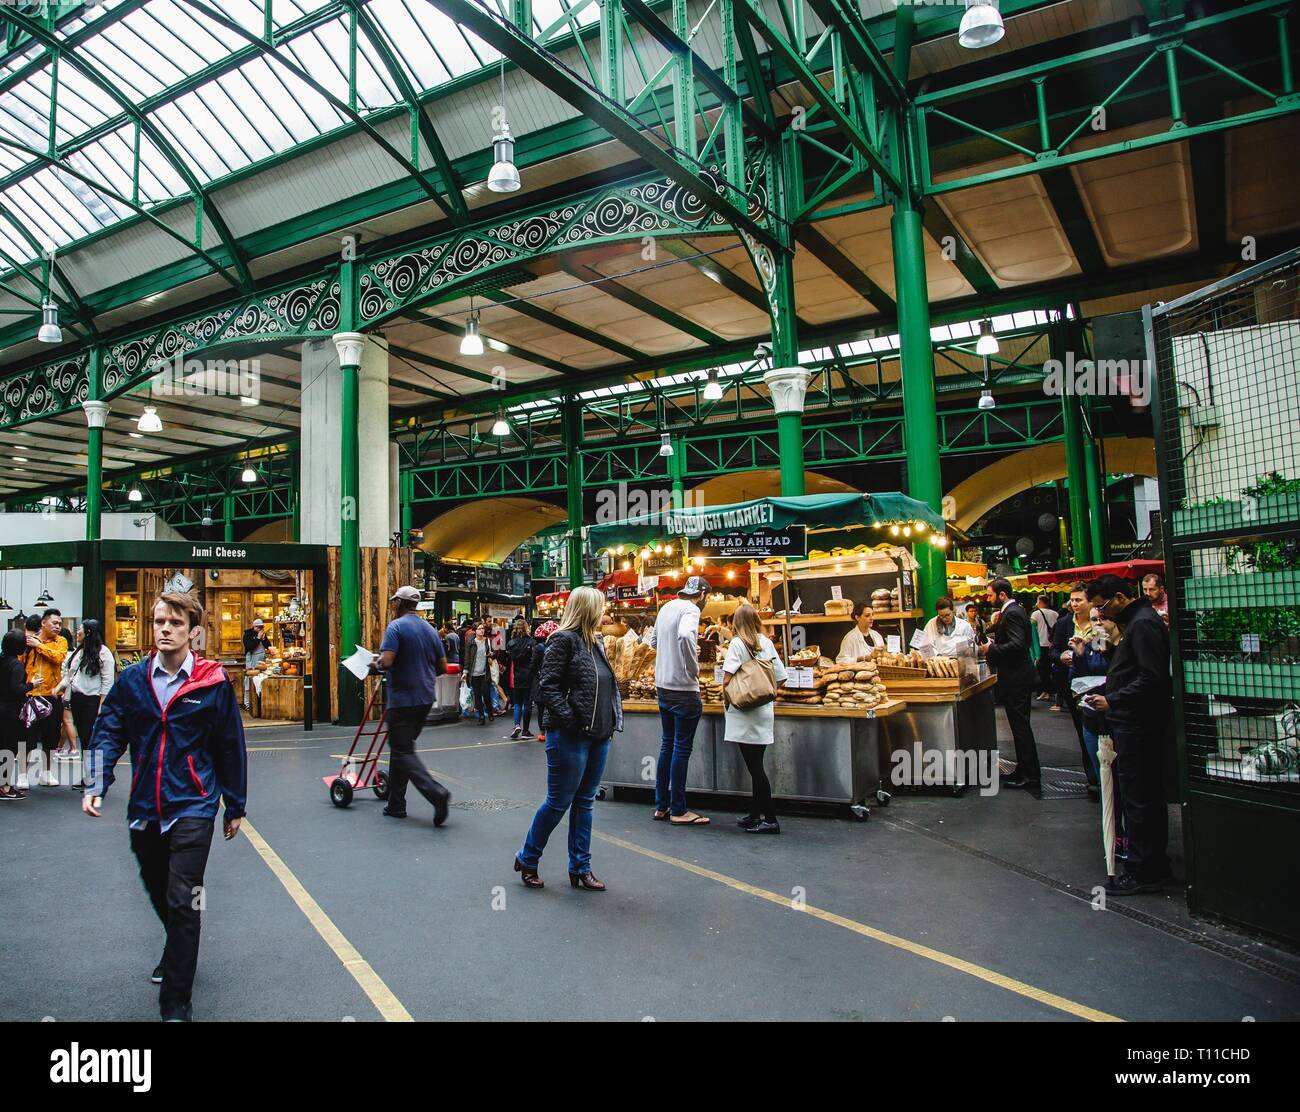 Shoppers at Boroughs Market Bread Stand Stock Photo